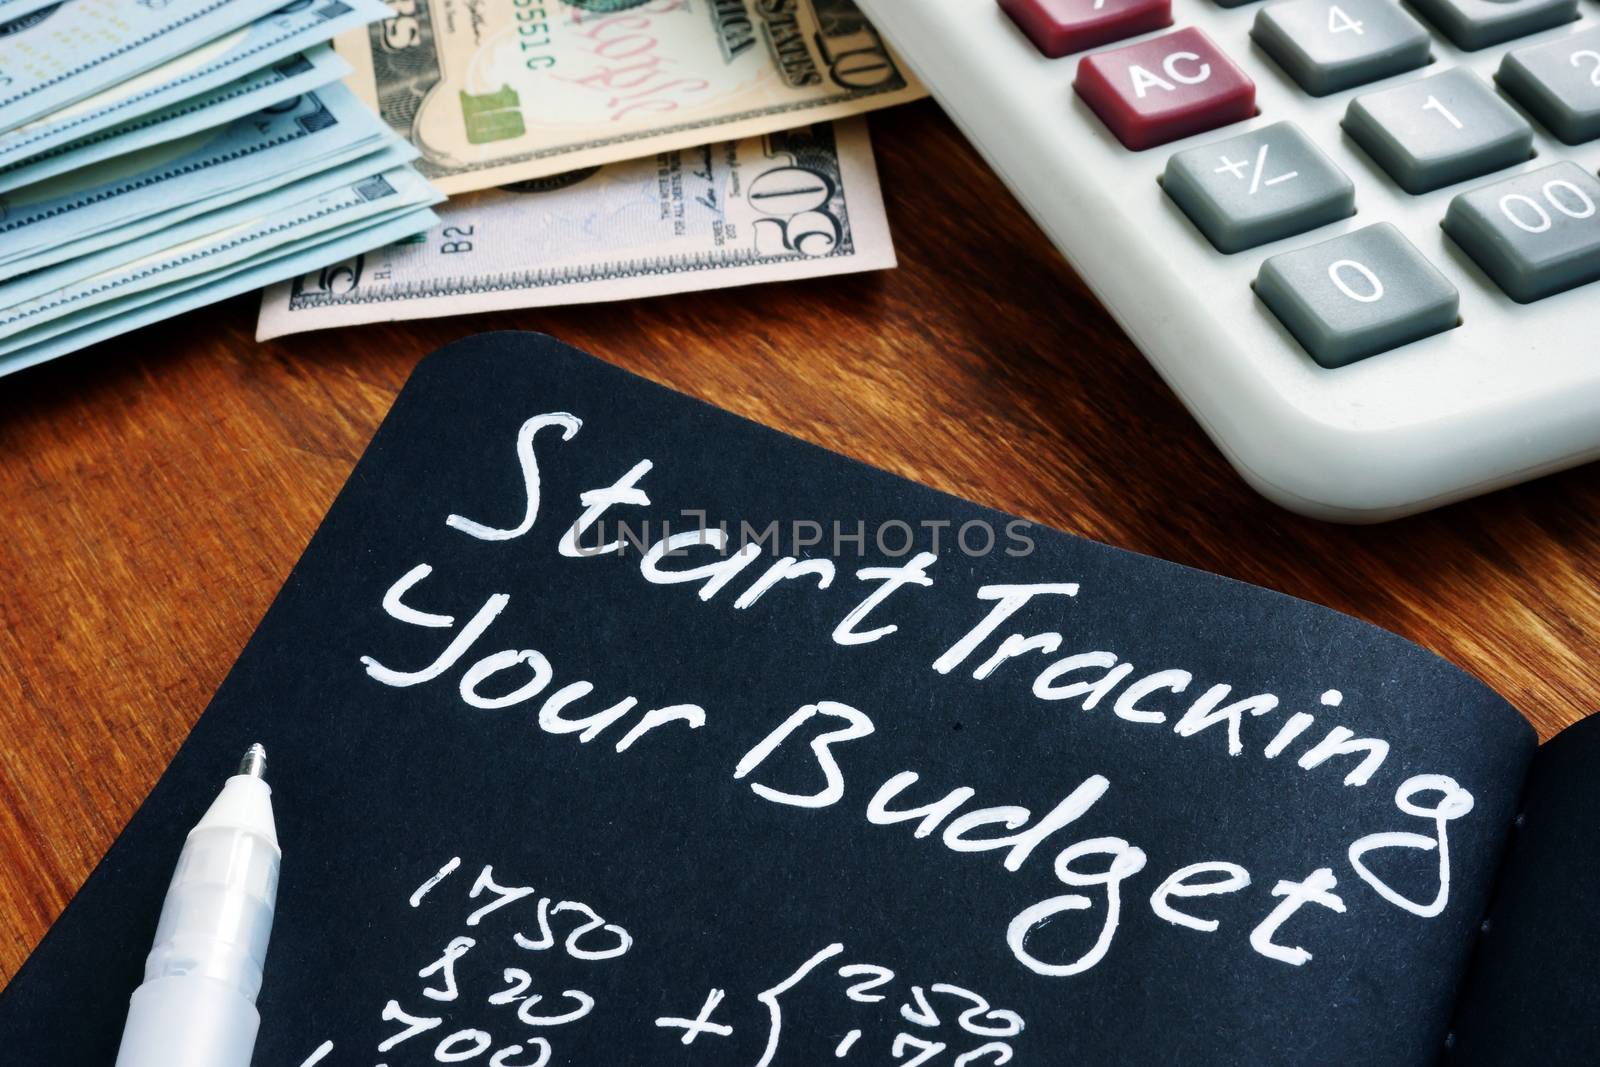 Start tracking your budget sign with home finances calculations.